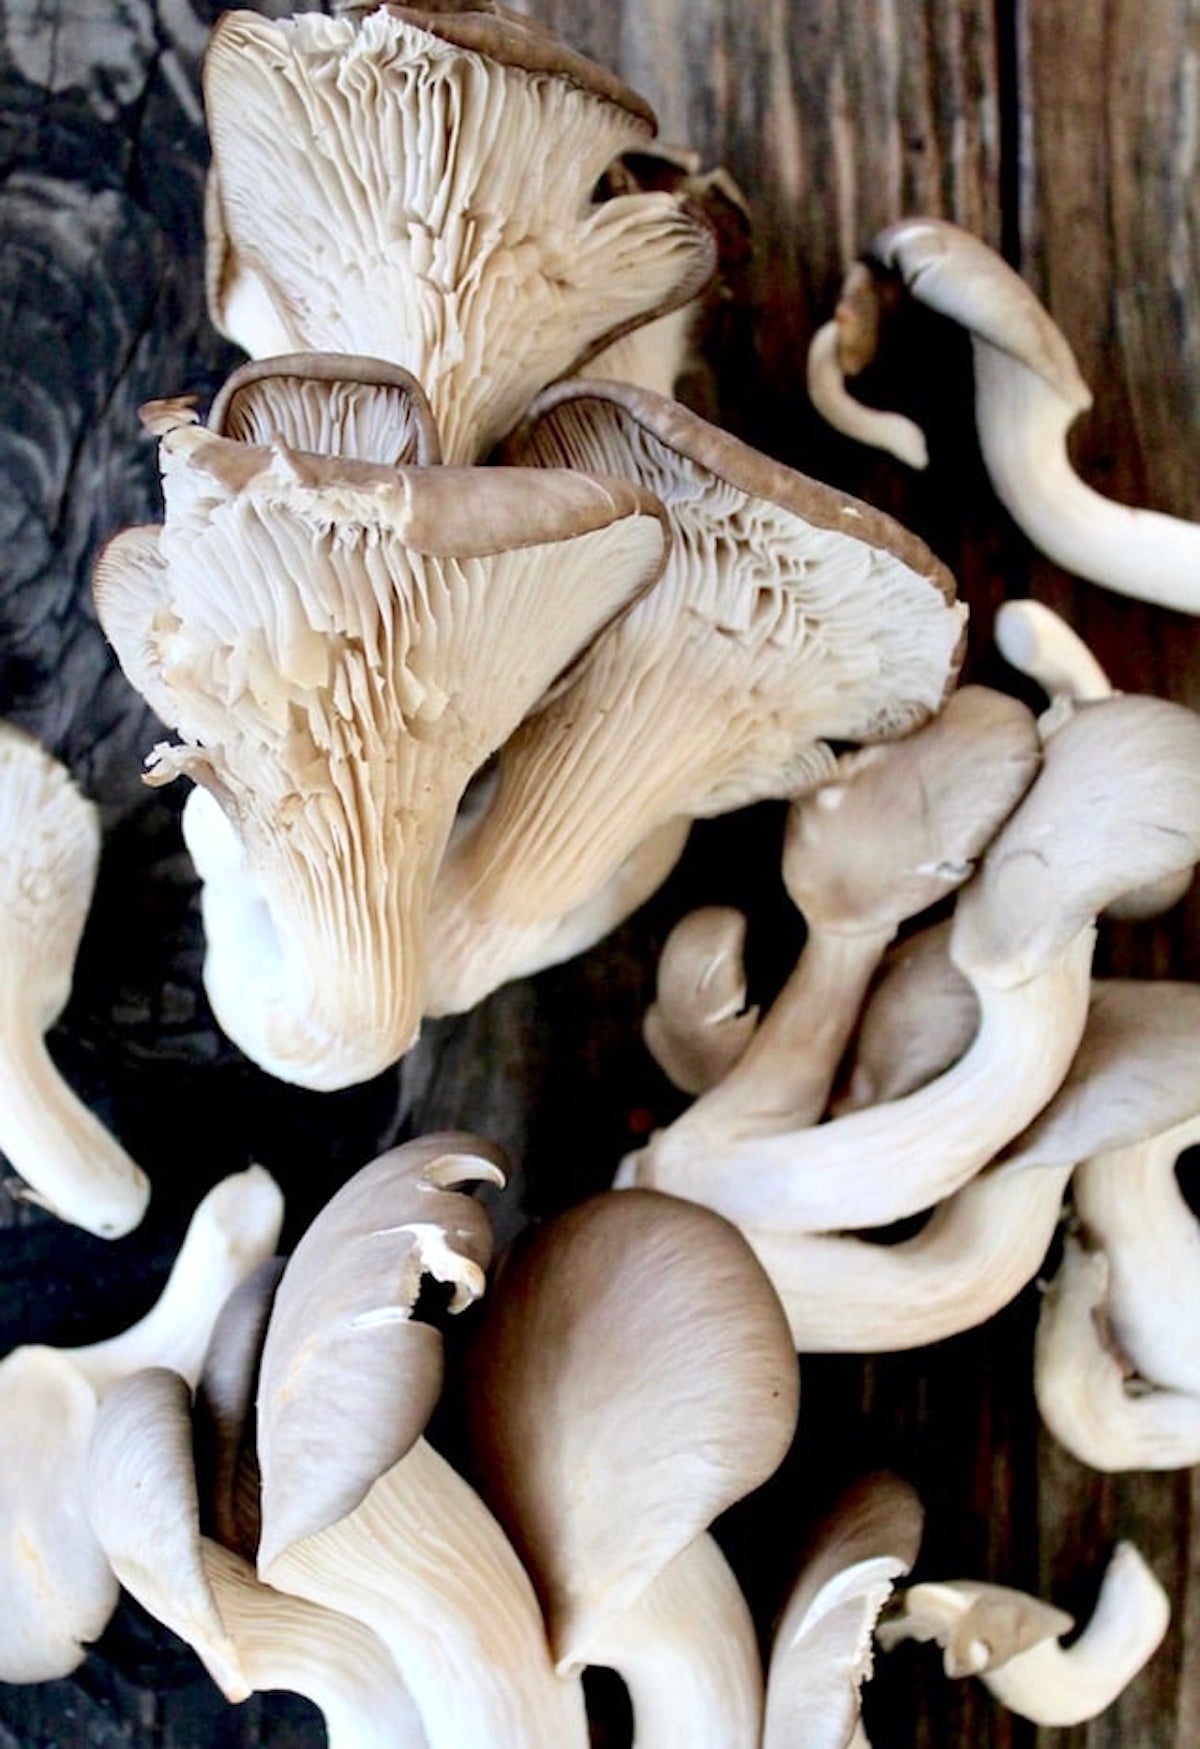 Several clusters of raw oyster mushrooms on wood.